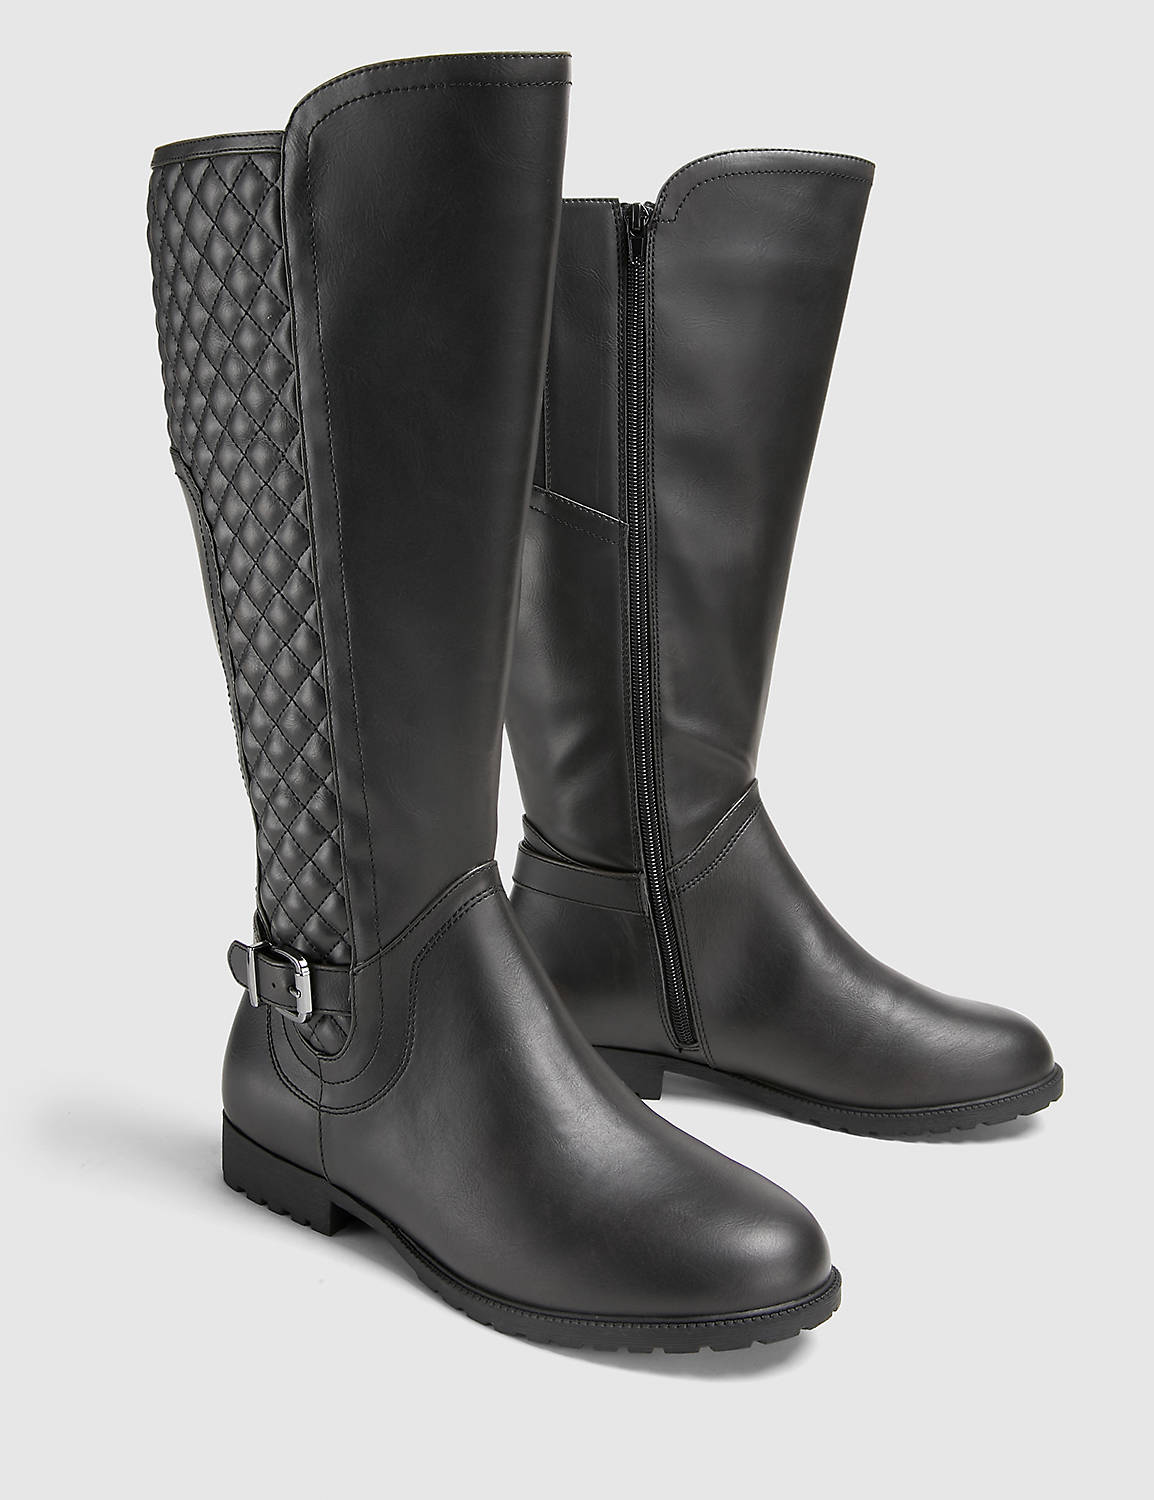 Dream Cloud Quilted Dressy Riding Boot- Wide Width:Black 2008:8W Product Image 1